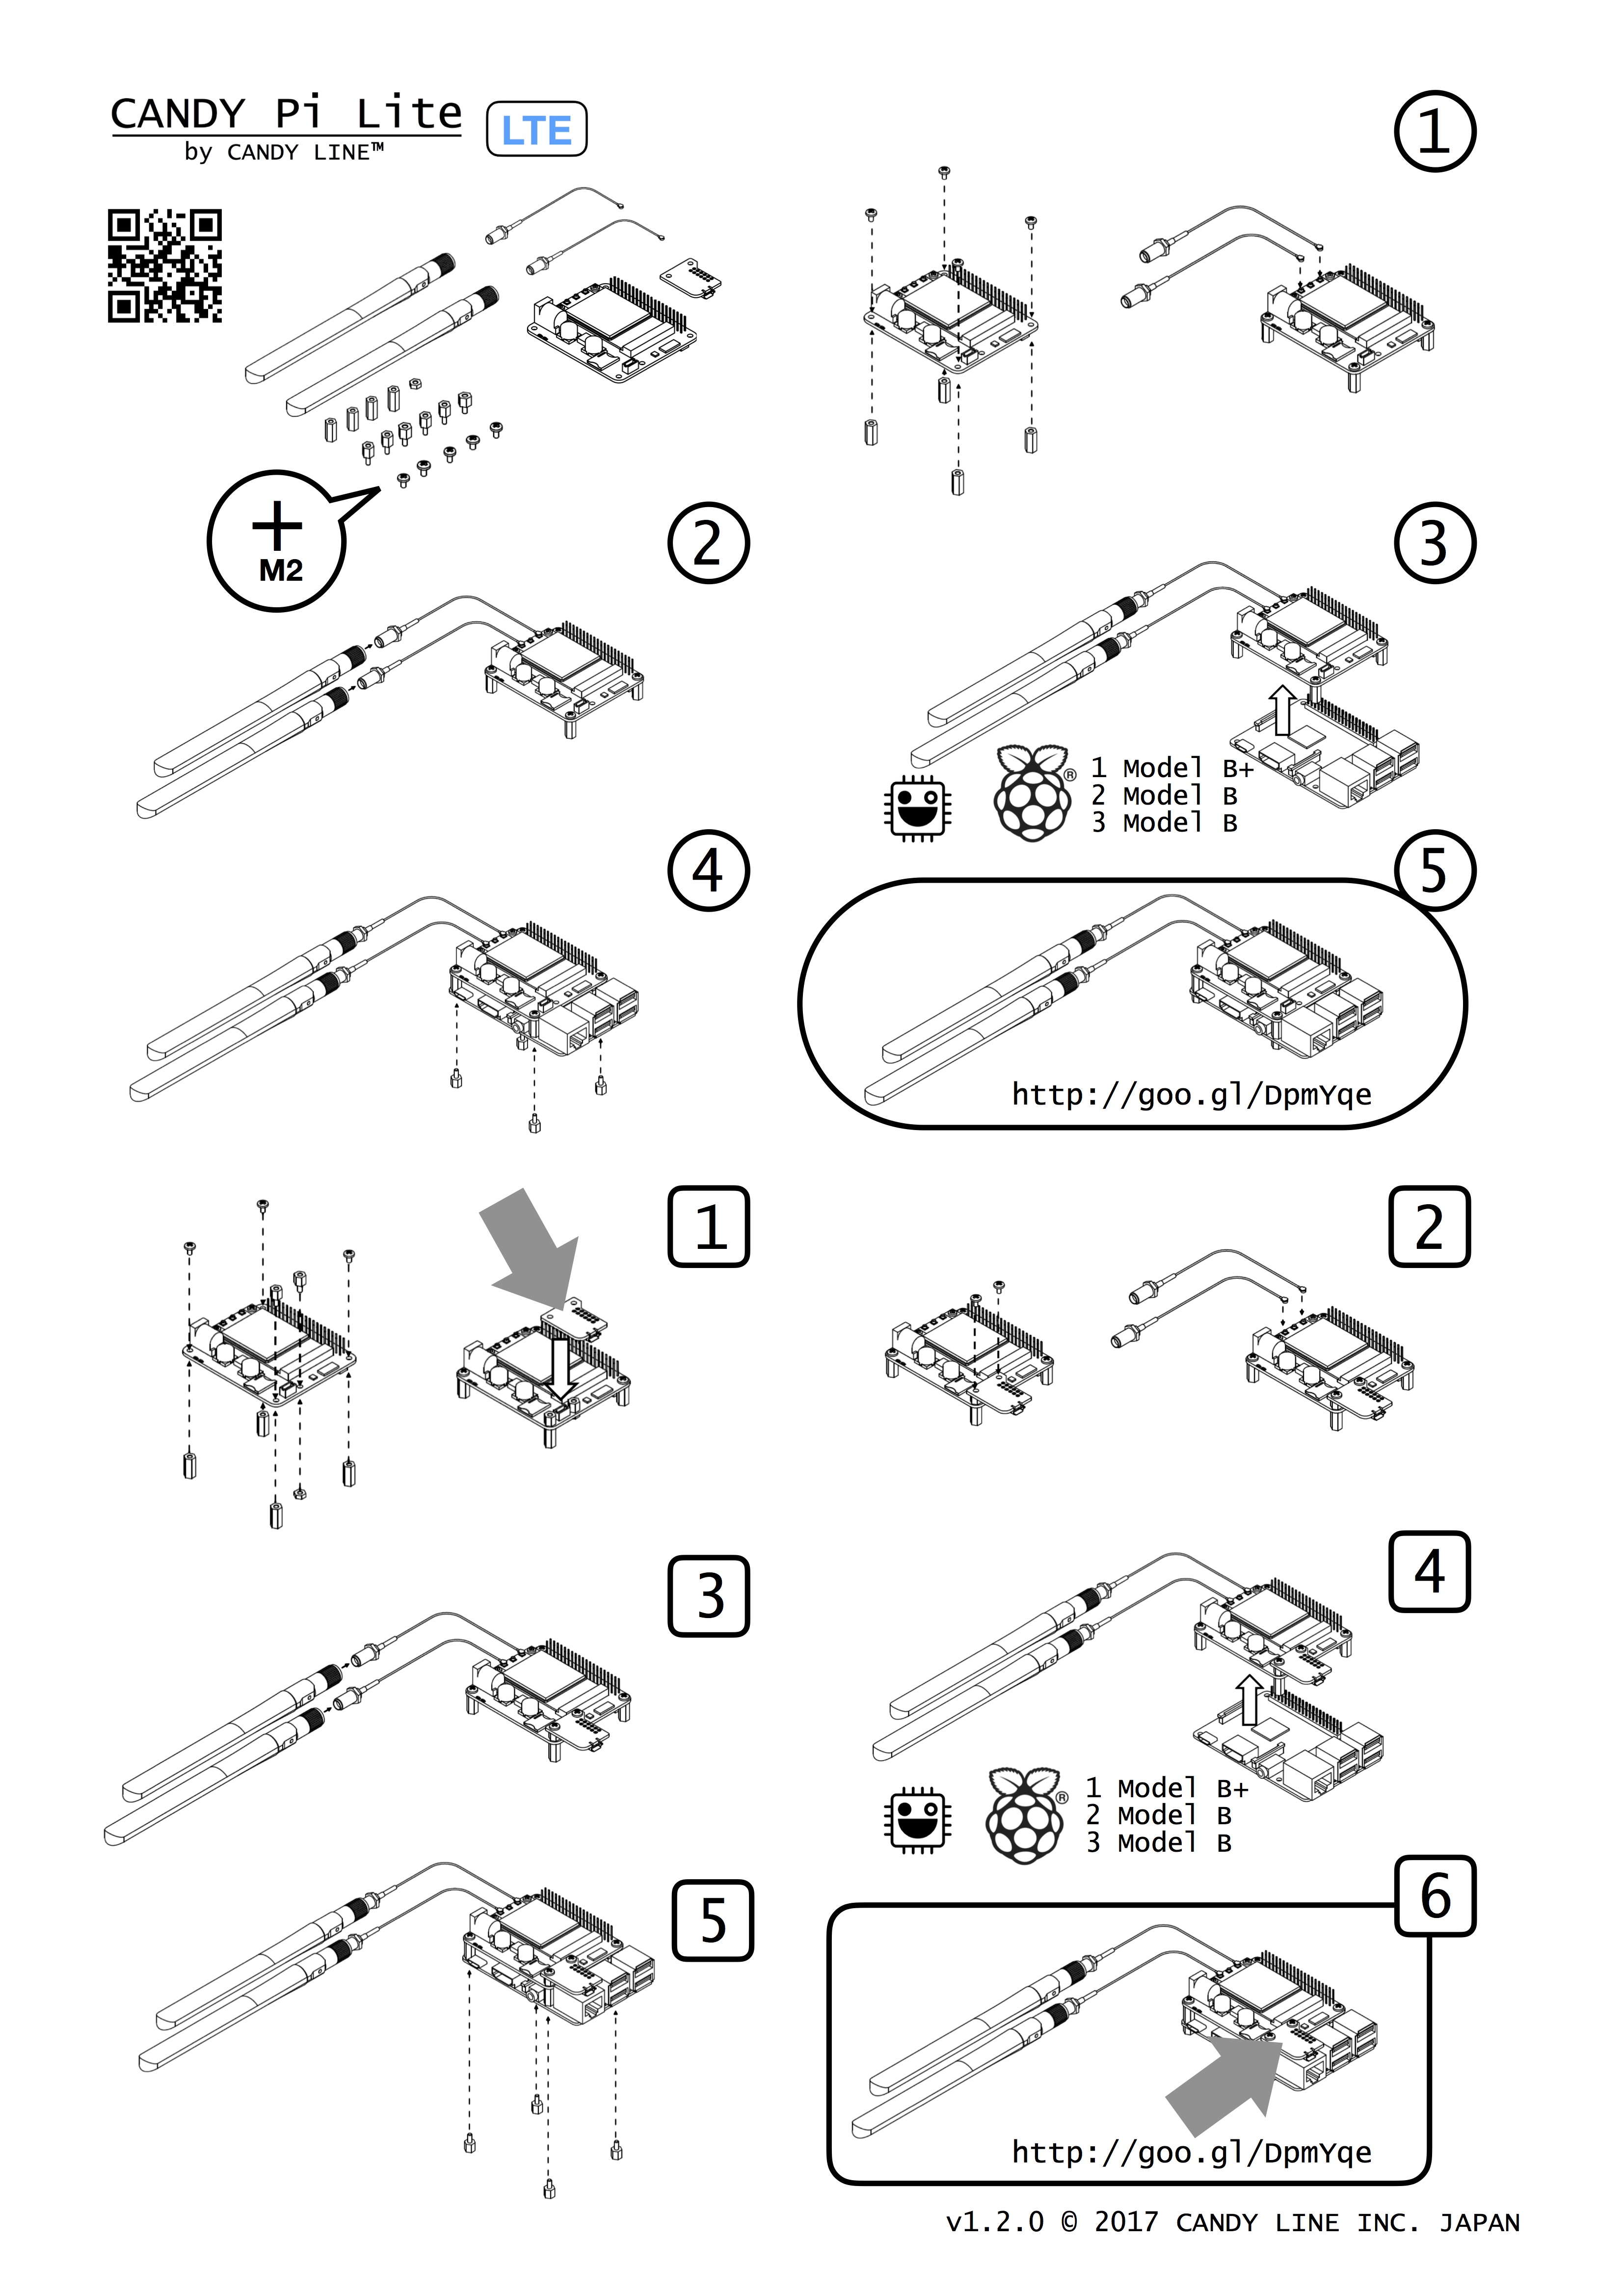 How to assemble(LTE)